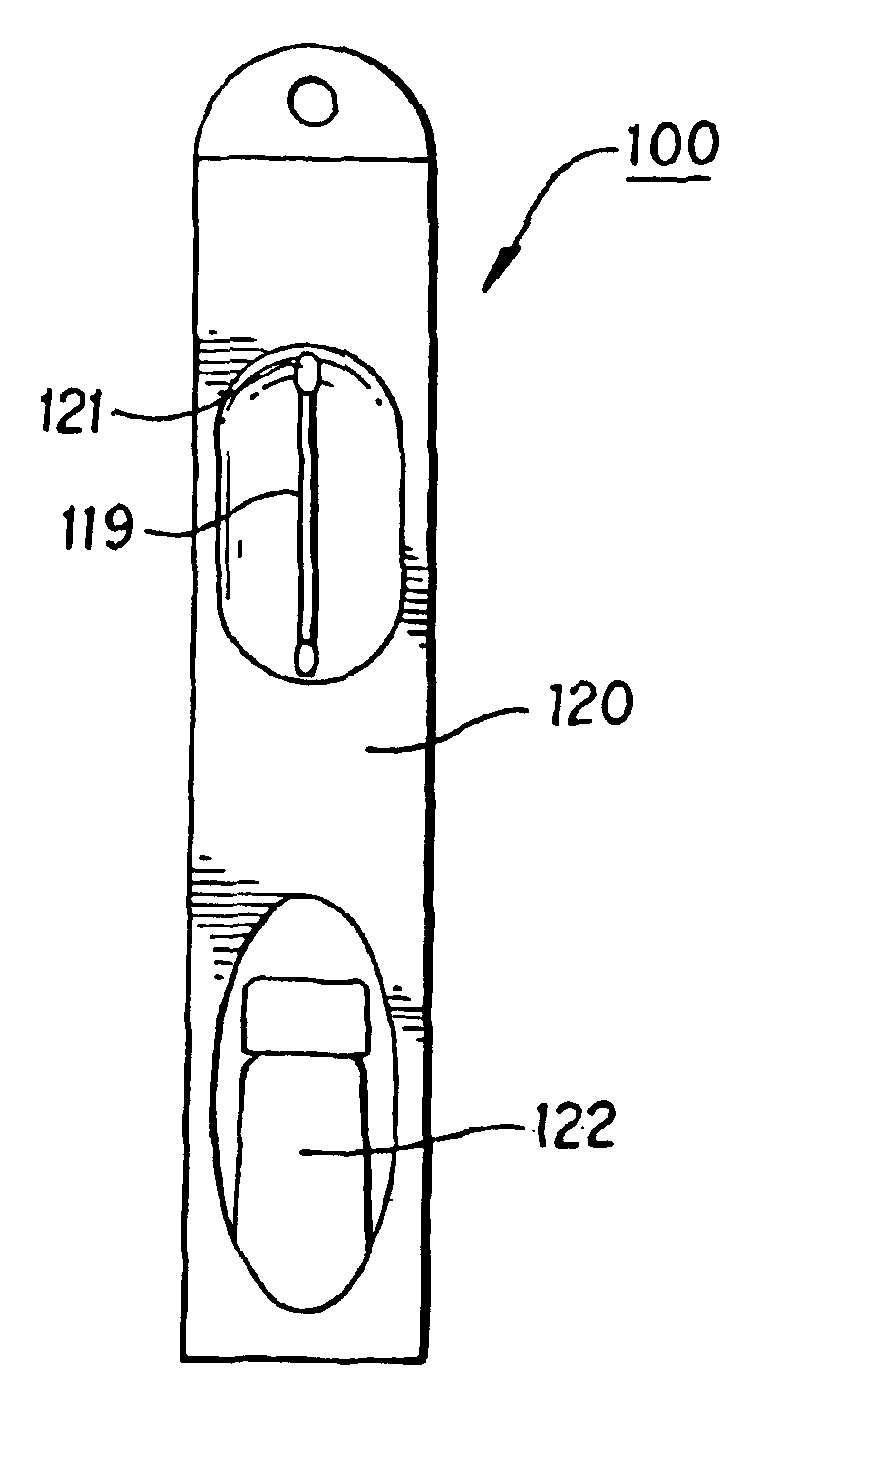 Package assembly with applicator and container for adhesive materials